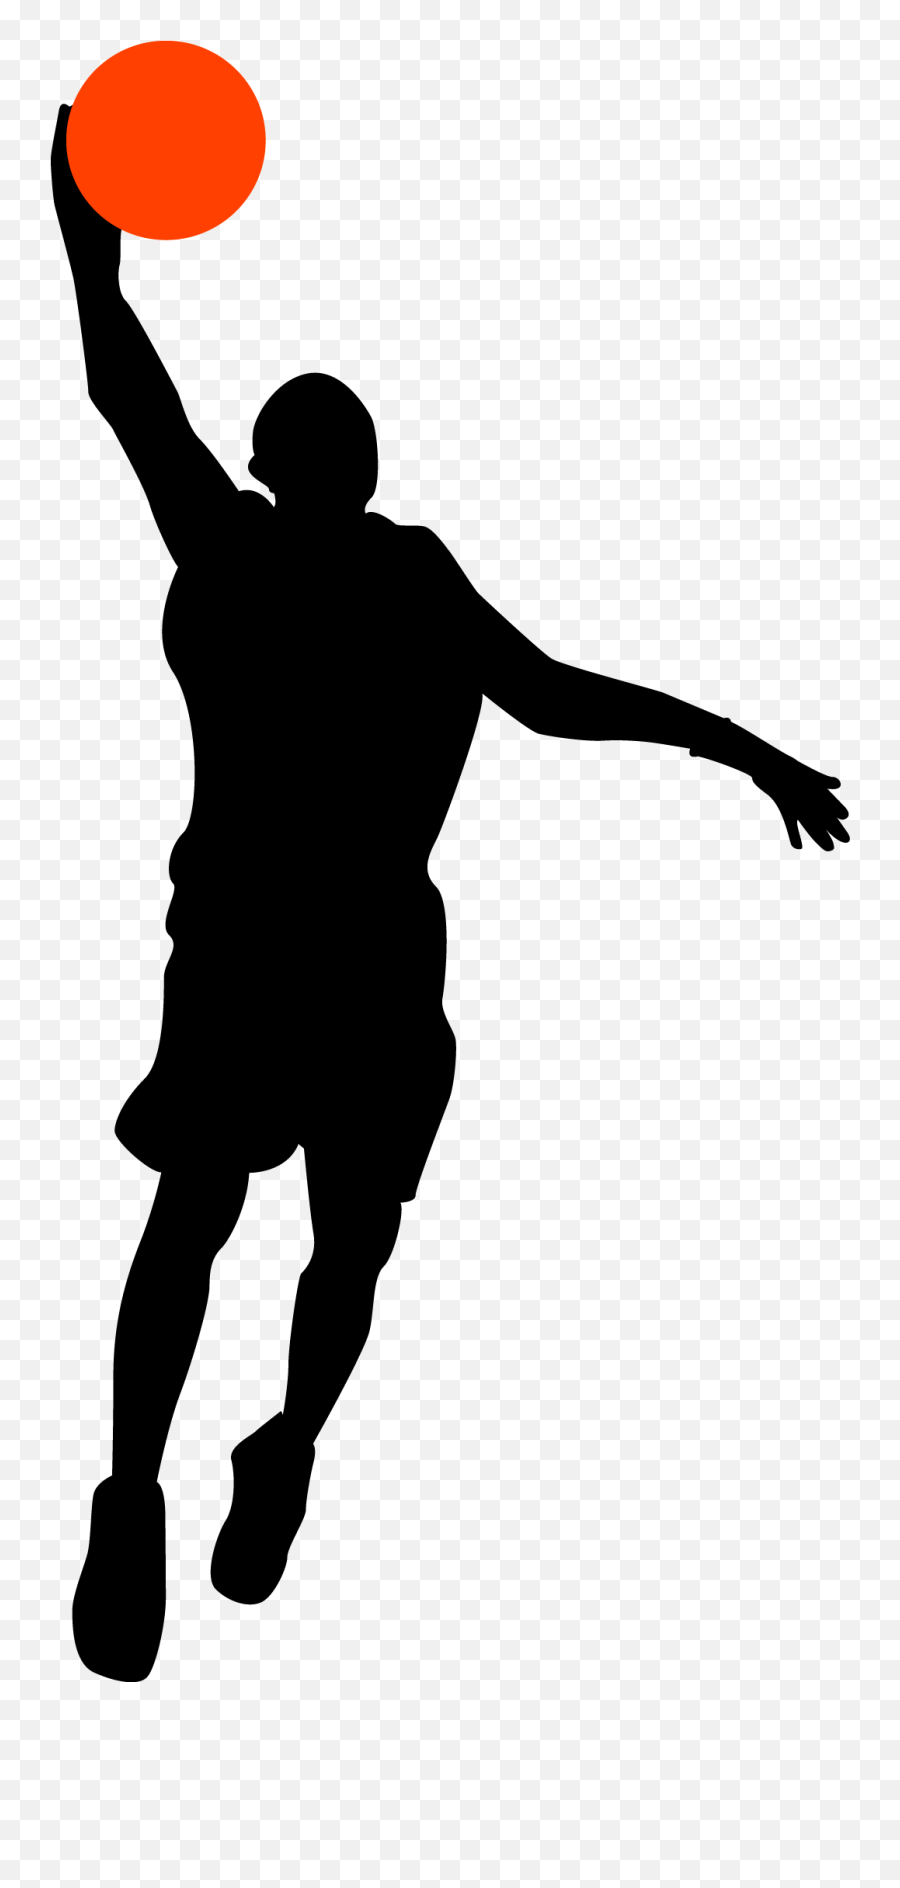 Basketball Png Clipart - Basketball Player Sport Athlete Basketball Vector Emoji,Basketball Emoji Png